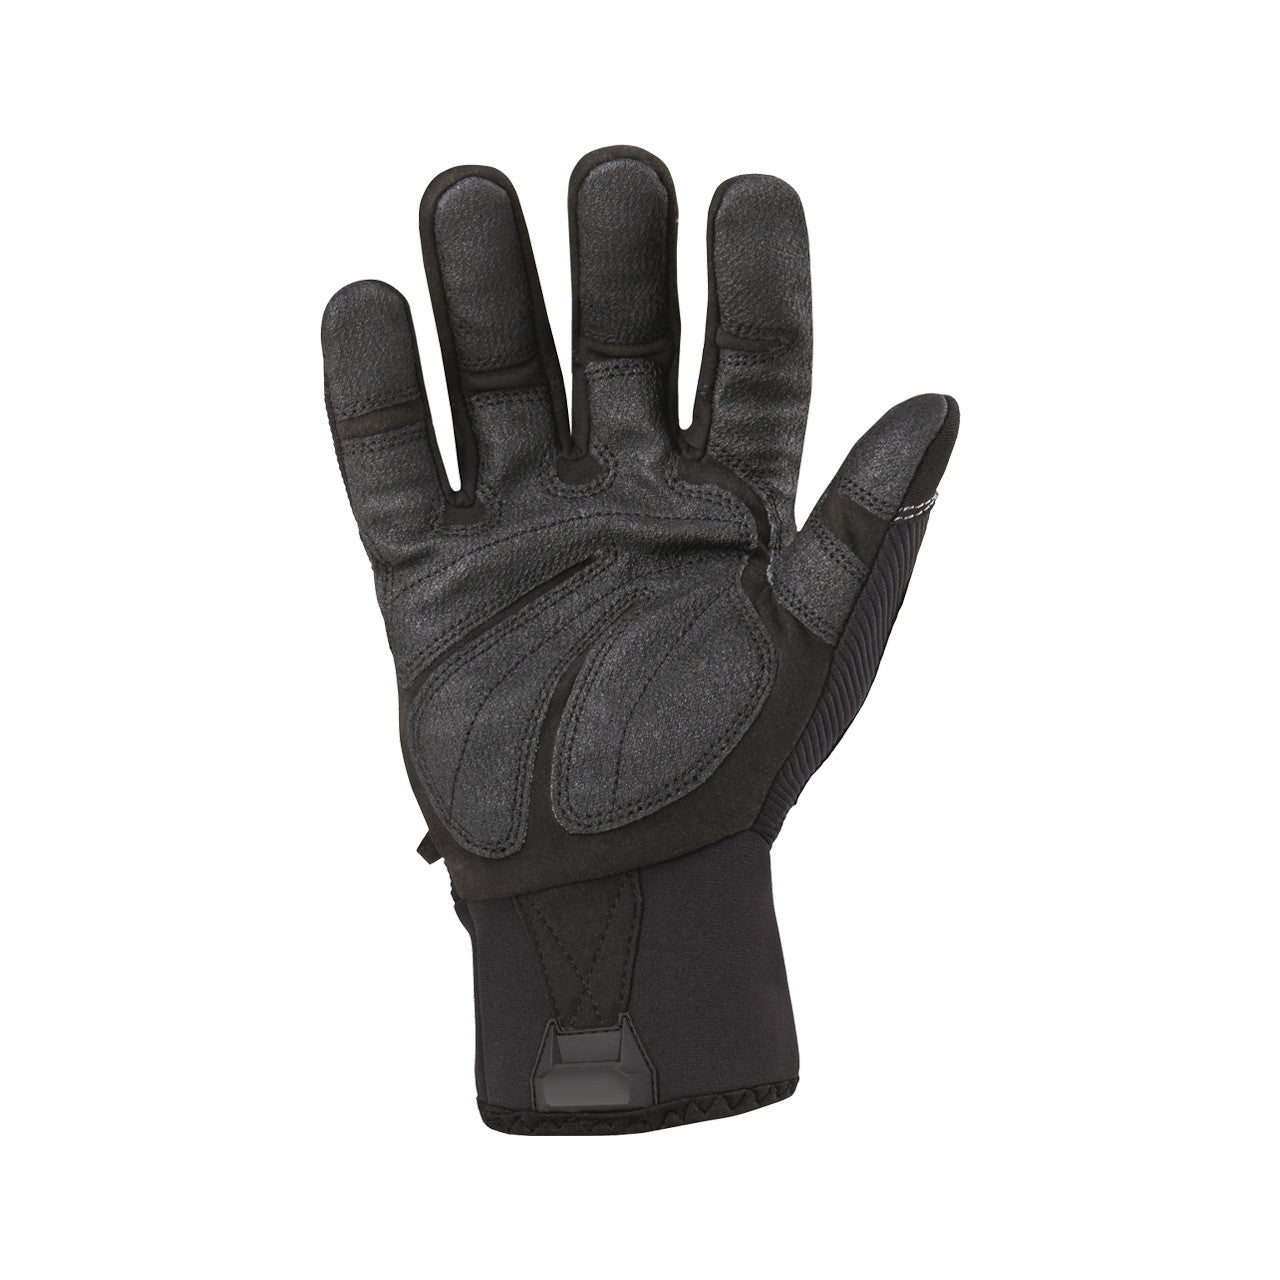 Ironclad Cold Condition® Glove Black-eSafety Supplies, Inc